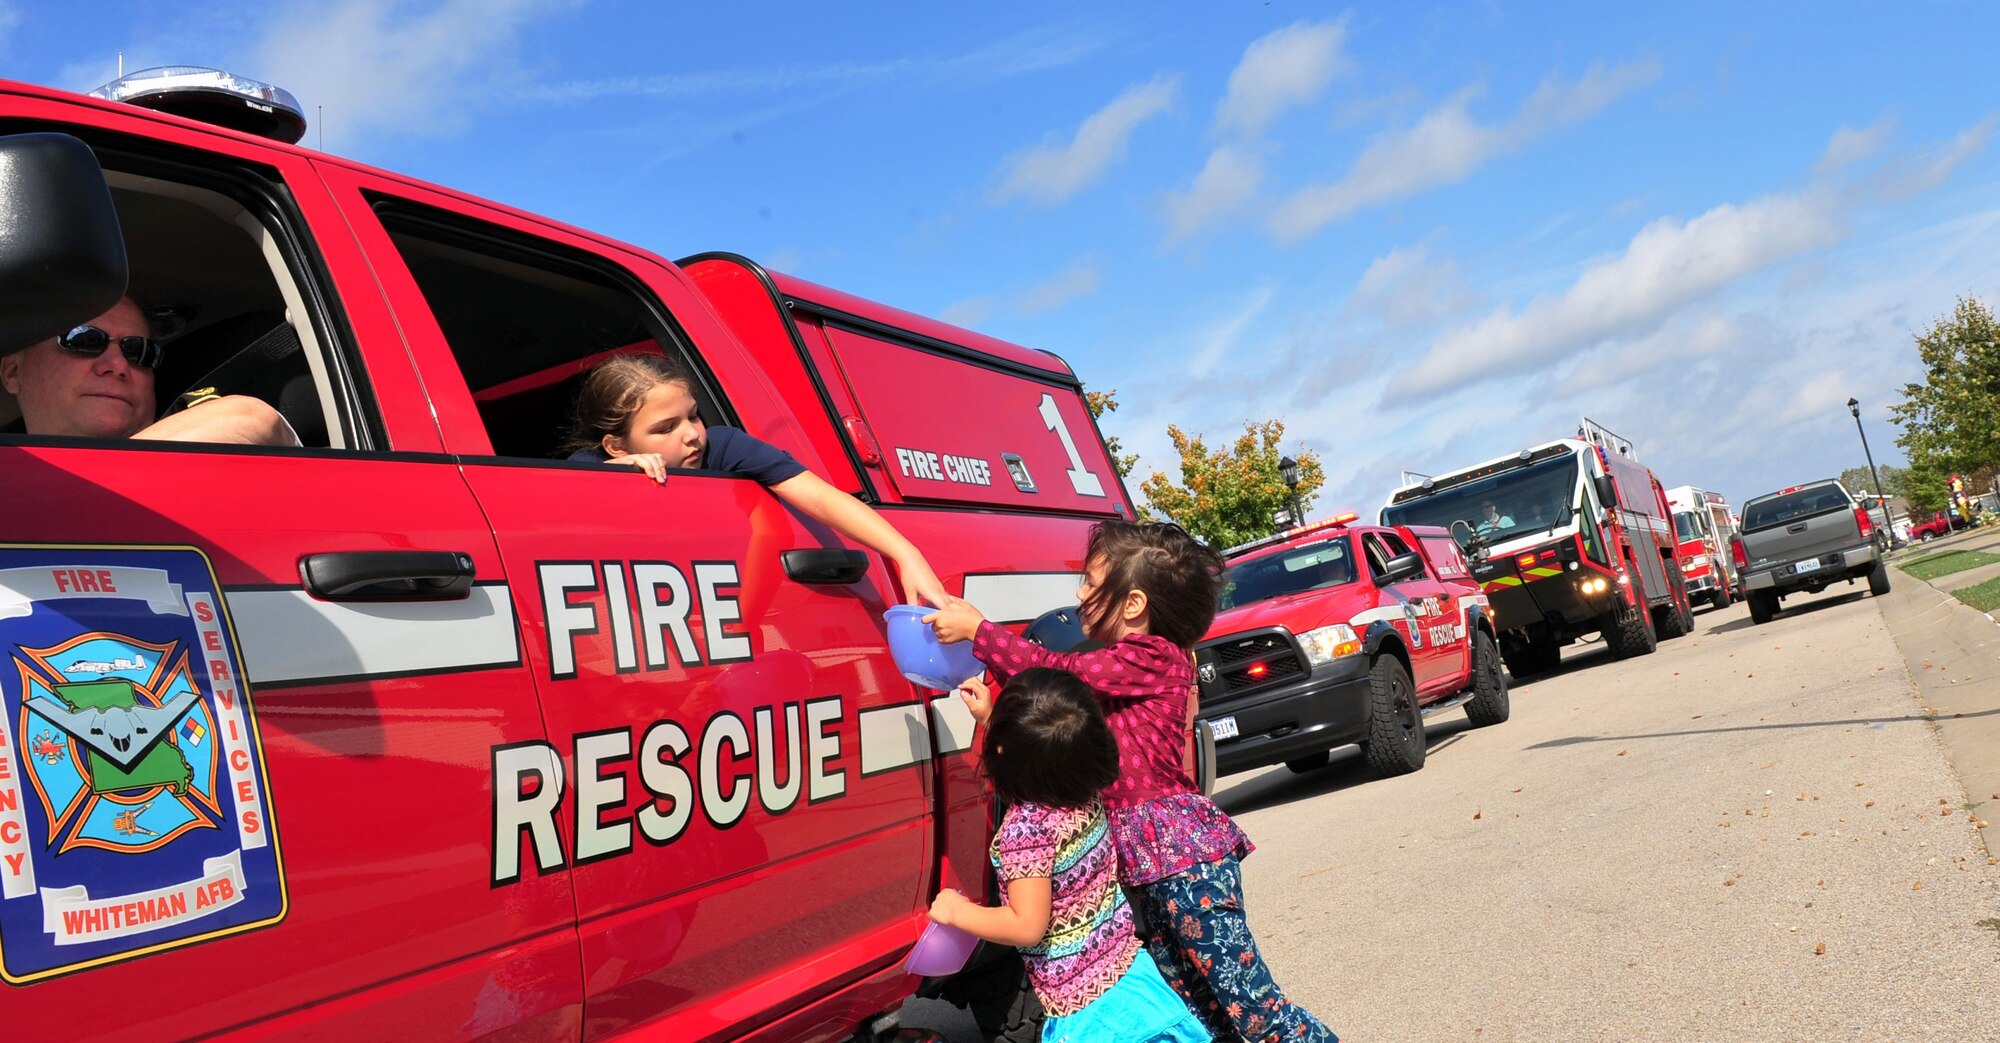 Whiteman leadership pass out candy to base housing residents during a Fire Prevention parade at Whiteman Air Force Base, Mo., Oct. 15, 2016. The fire prevention parade was the finale to Whiteman’s annual fire prevention week.  (U.S. Air Force photo by Senior Airman Jovan Banks)